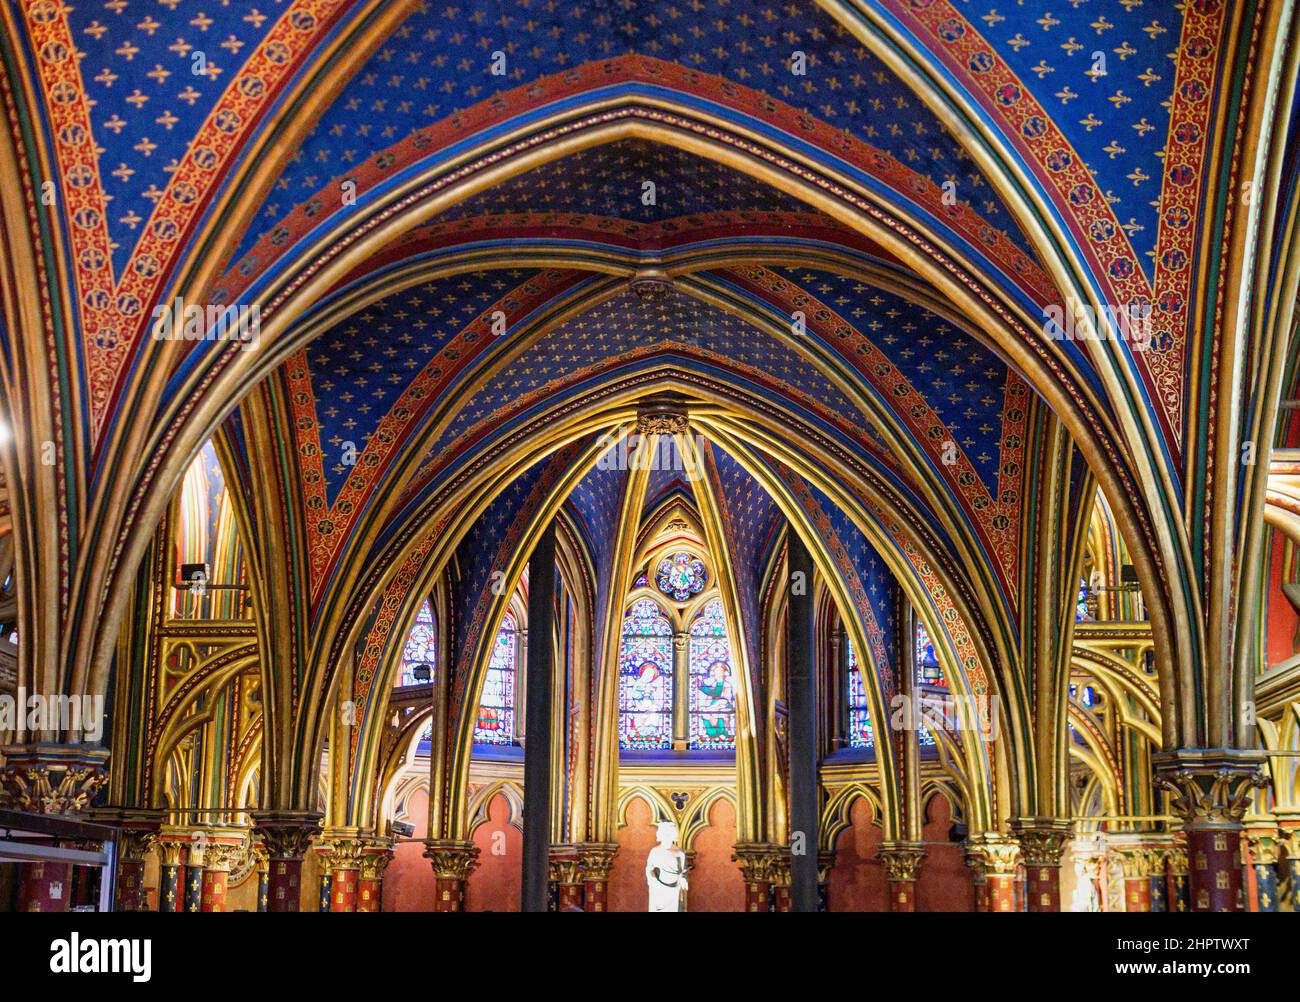 Ceiling of the Lower Floor Sainte Chapelle: Extravagant arches gilded with gold in a deep blue ceiling dominate the lower level of the famous chapel. Stock Photo